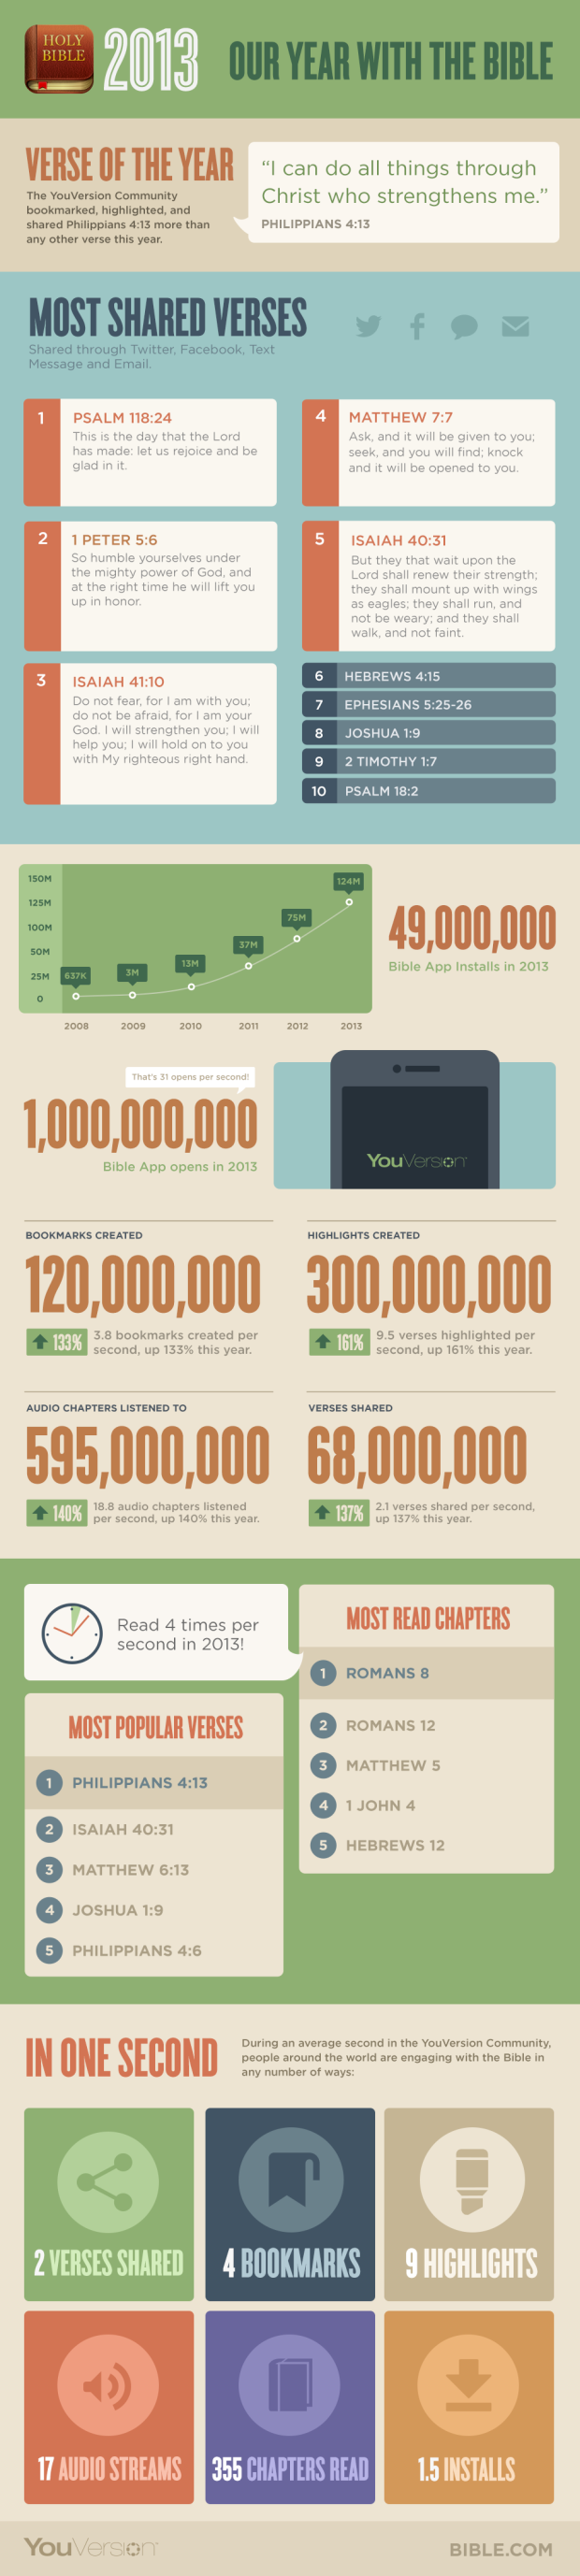 YV-Infographic-2013-Judson